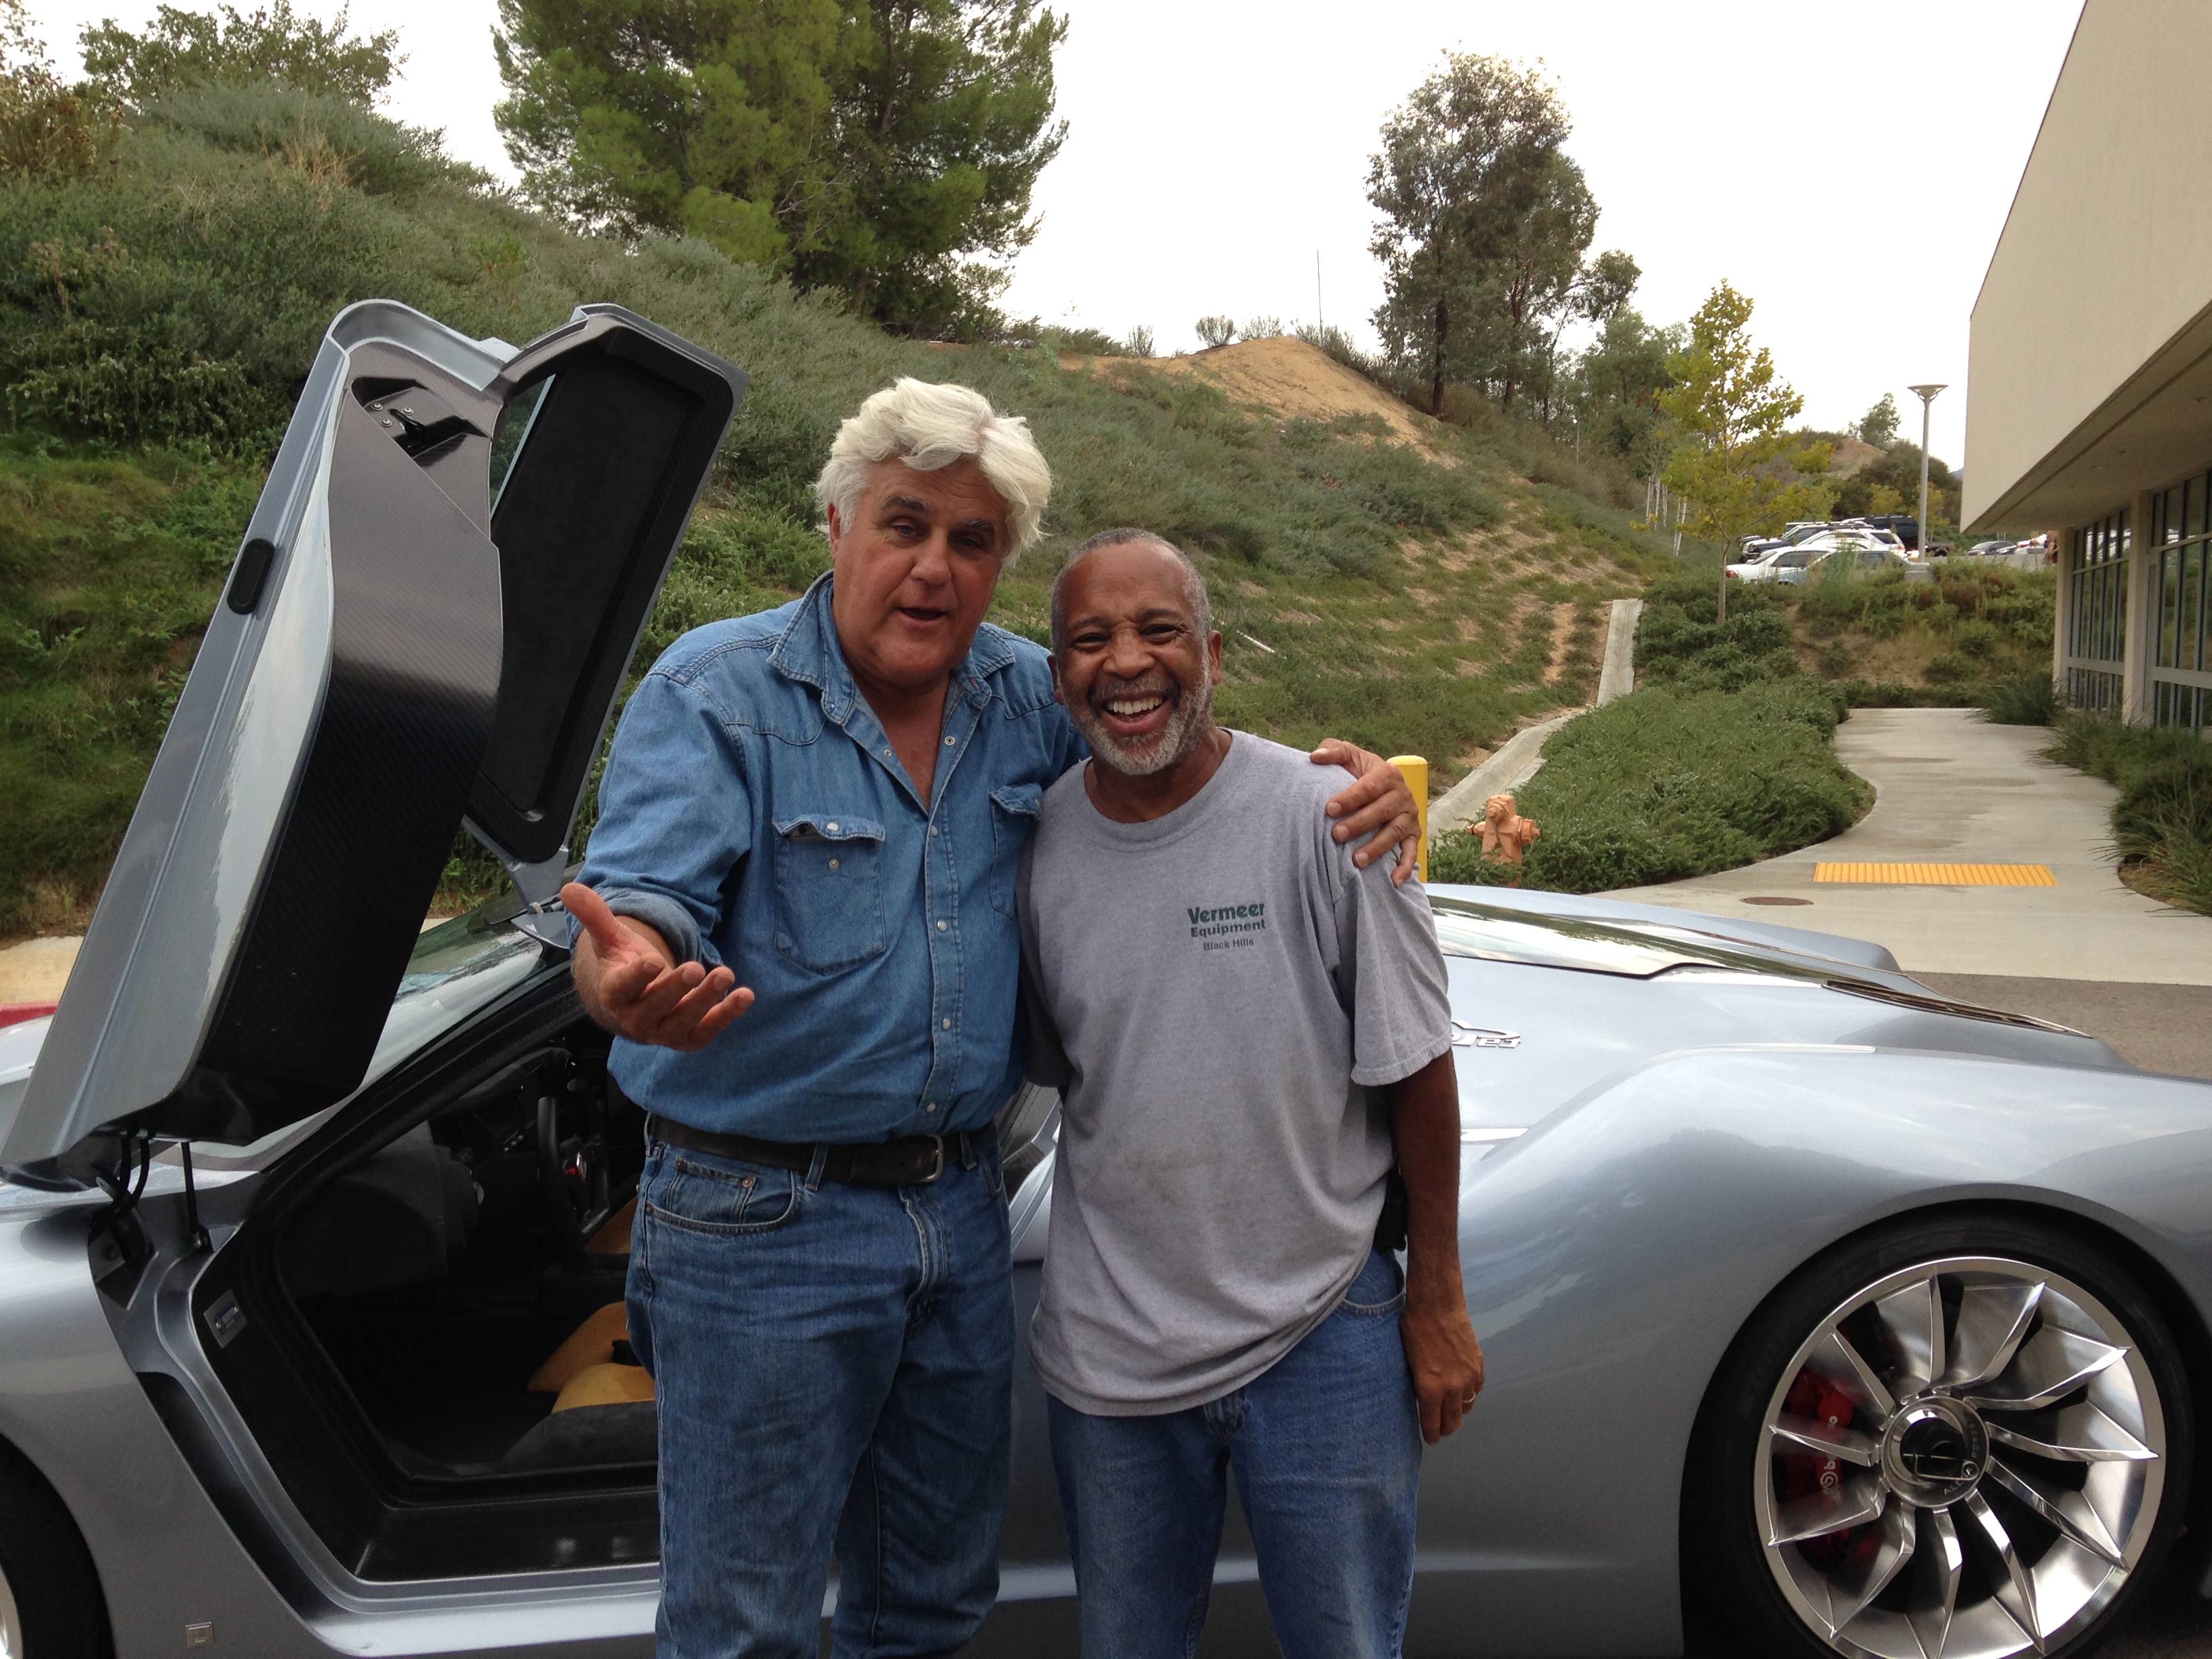 Me with Jay Leno, his Jet Powered car was featured in a commercial here at the College.